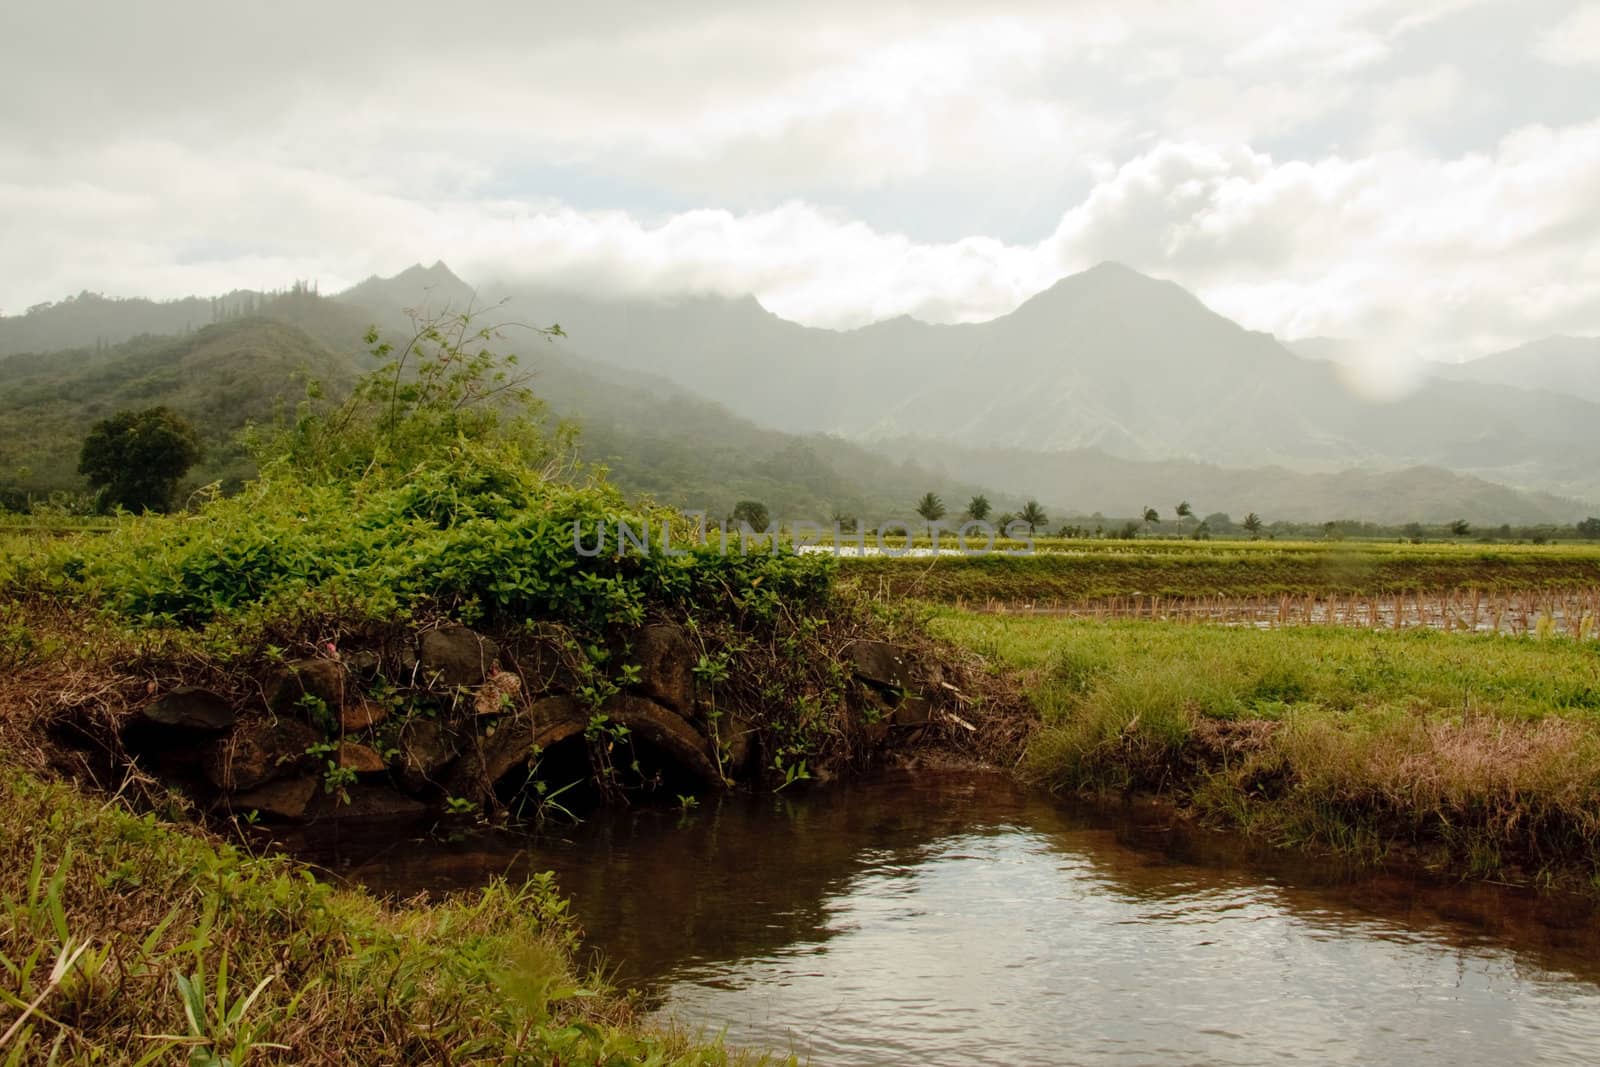 Small bridge over irrigation ditch in Hanalei valley by steheap